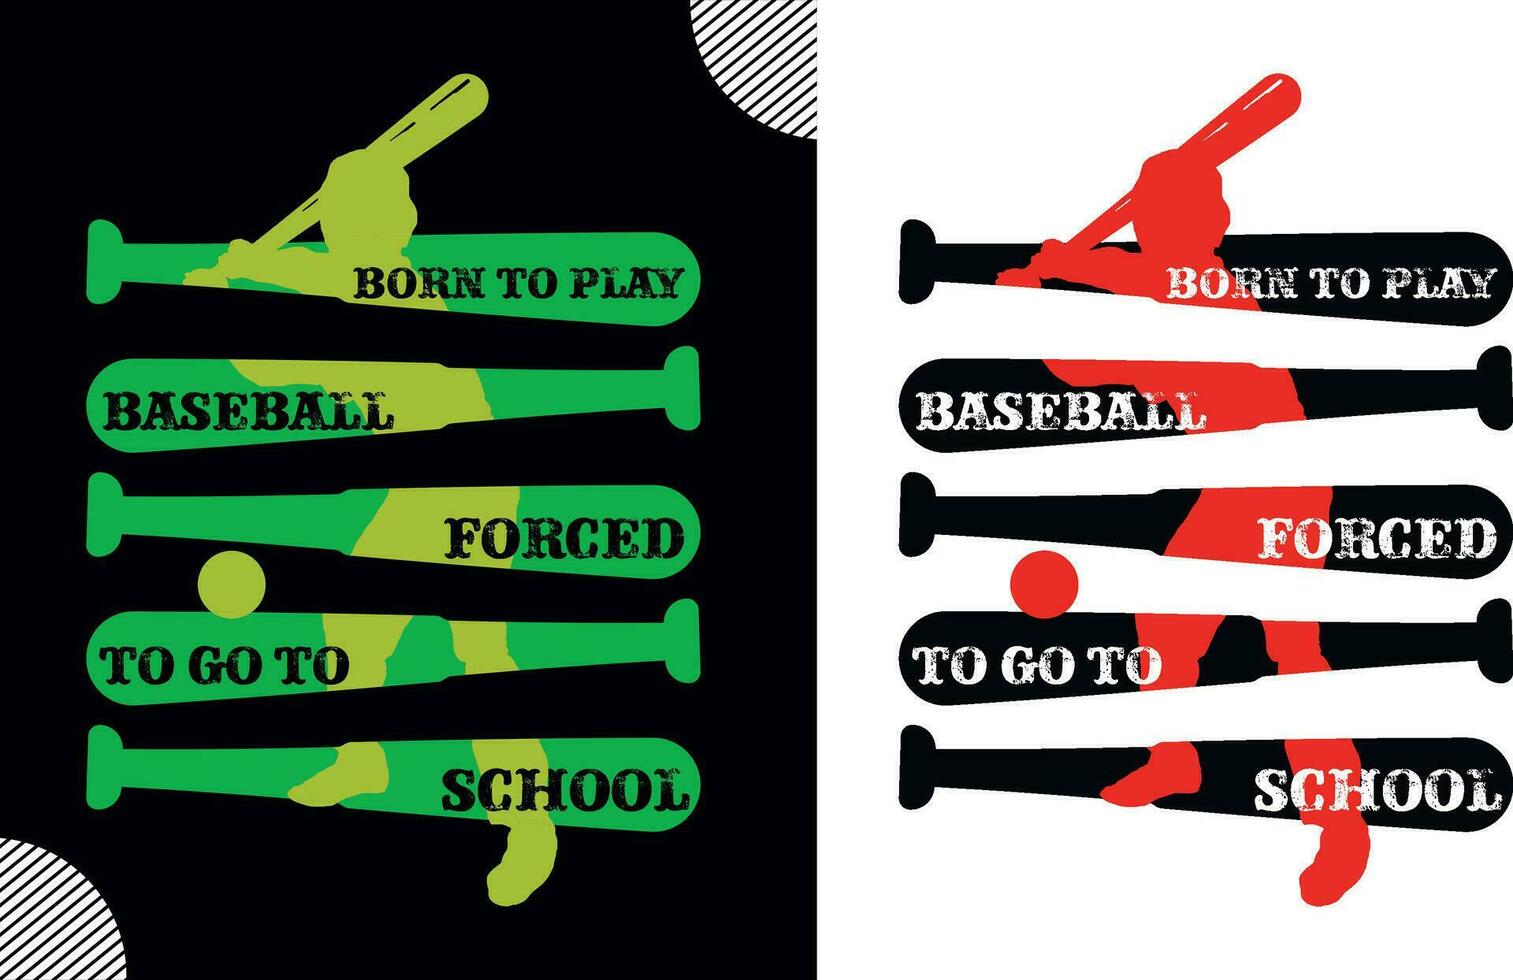 Born to play baseball forced to go to school, t shirt design vector